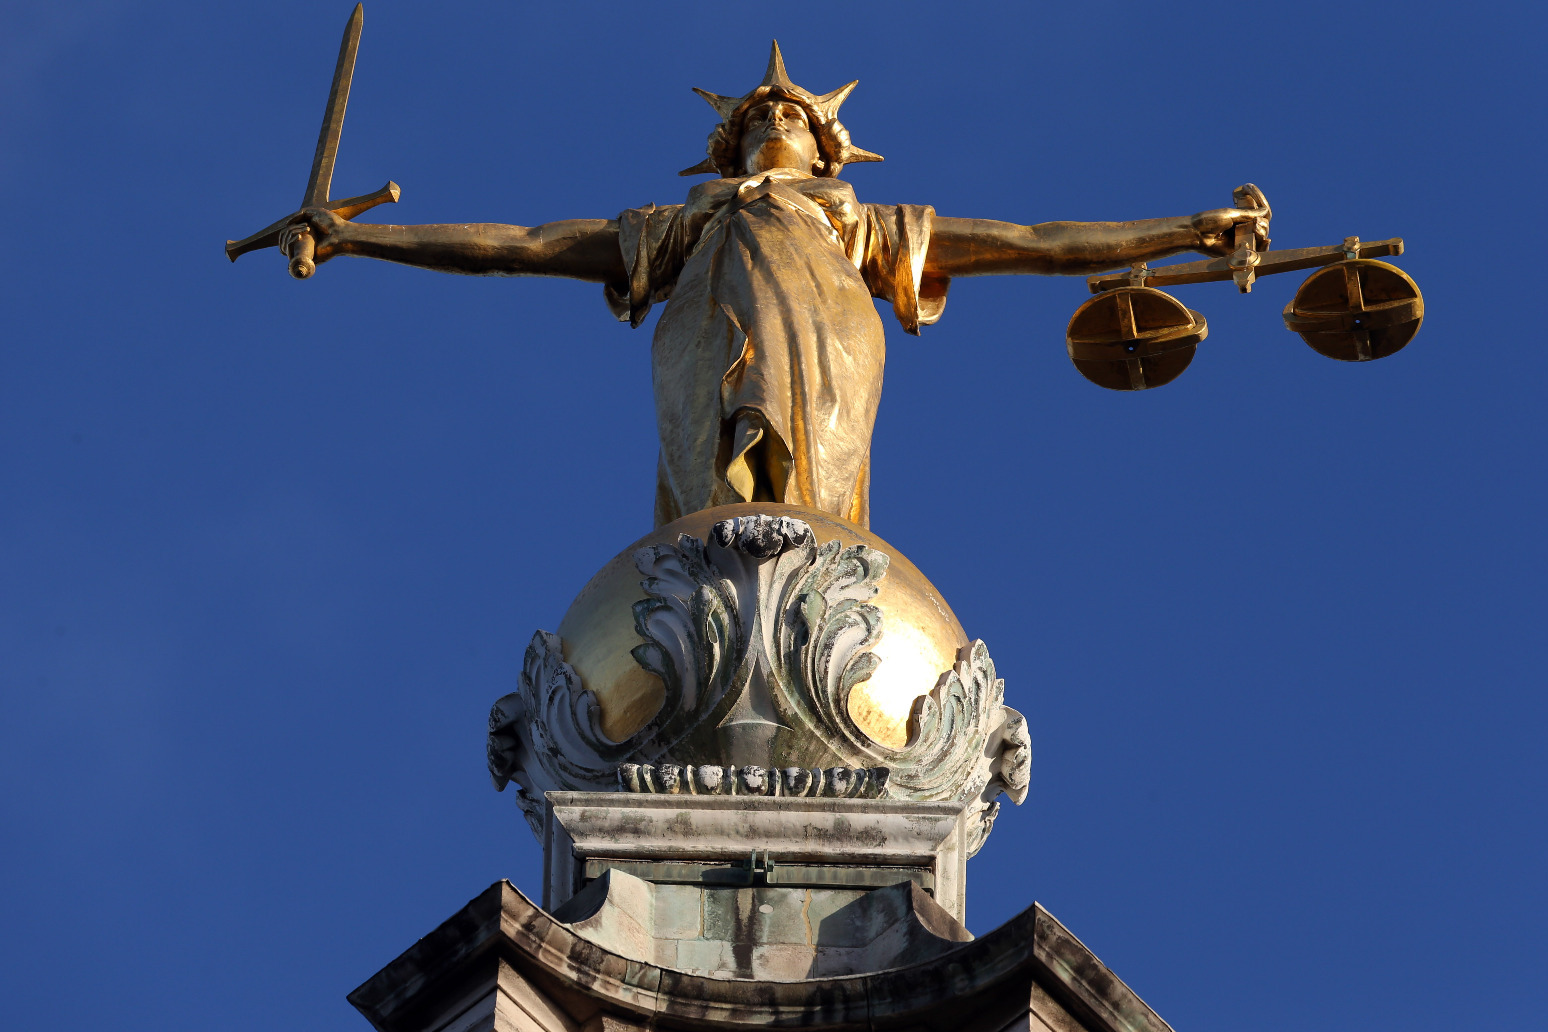 Watchdogs raise ‘serious concerns’ over performance of criminal justice system 